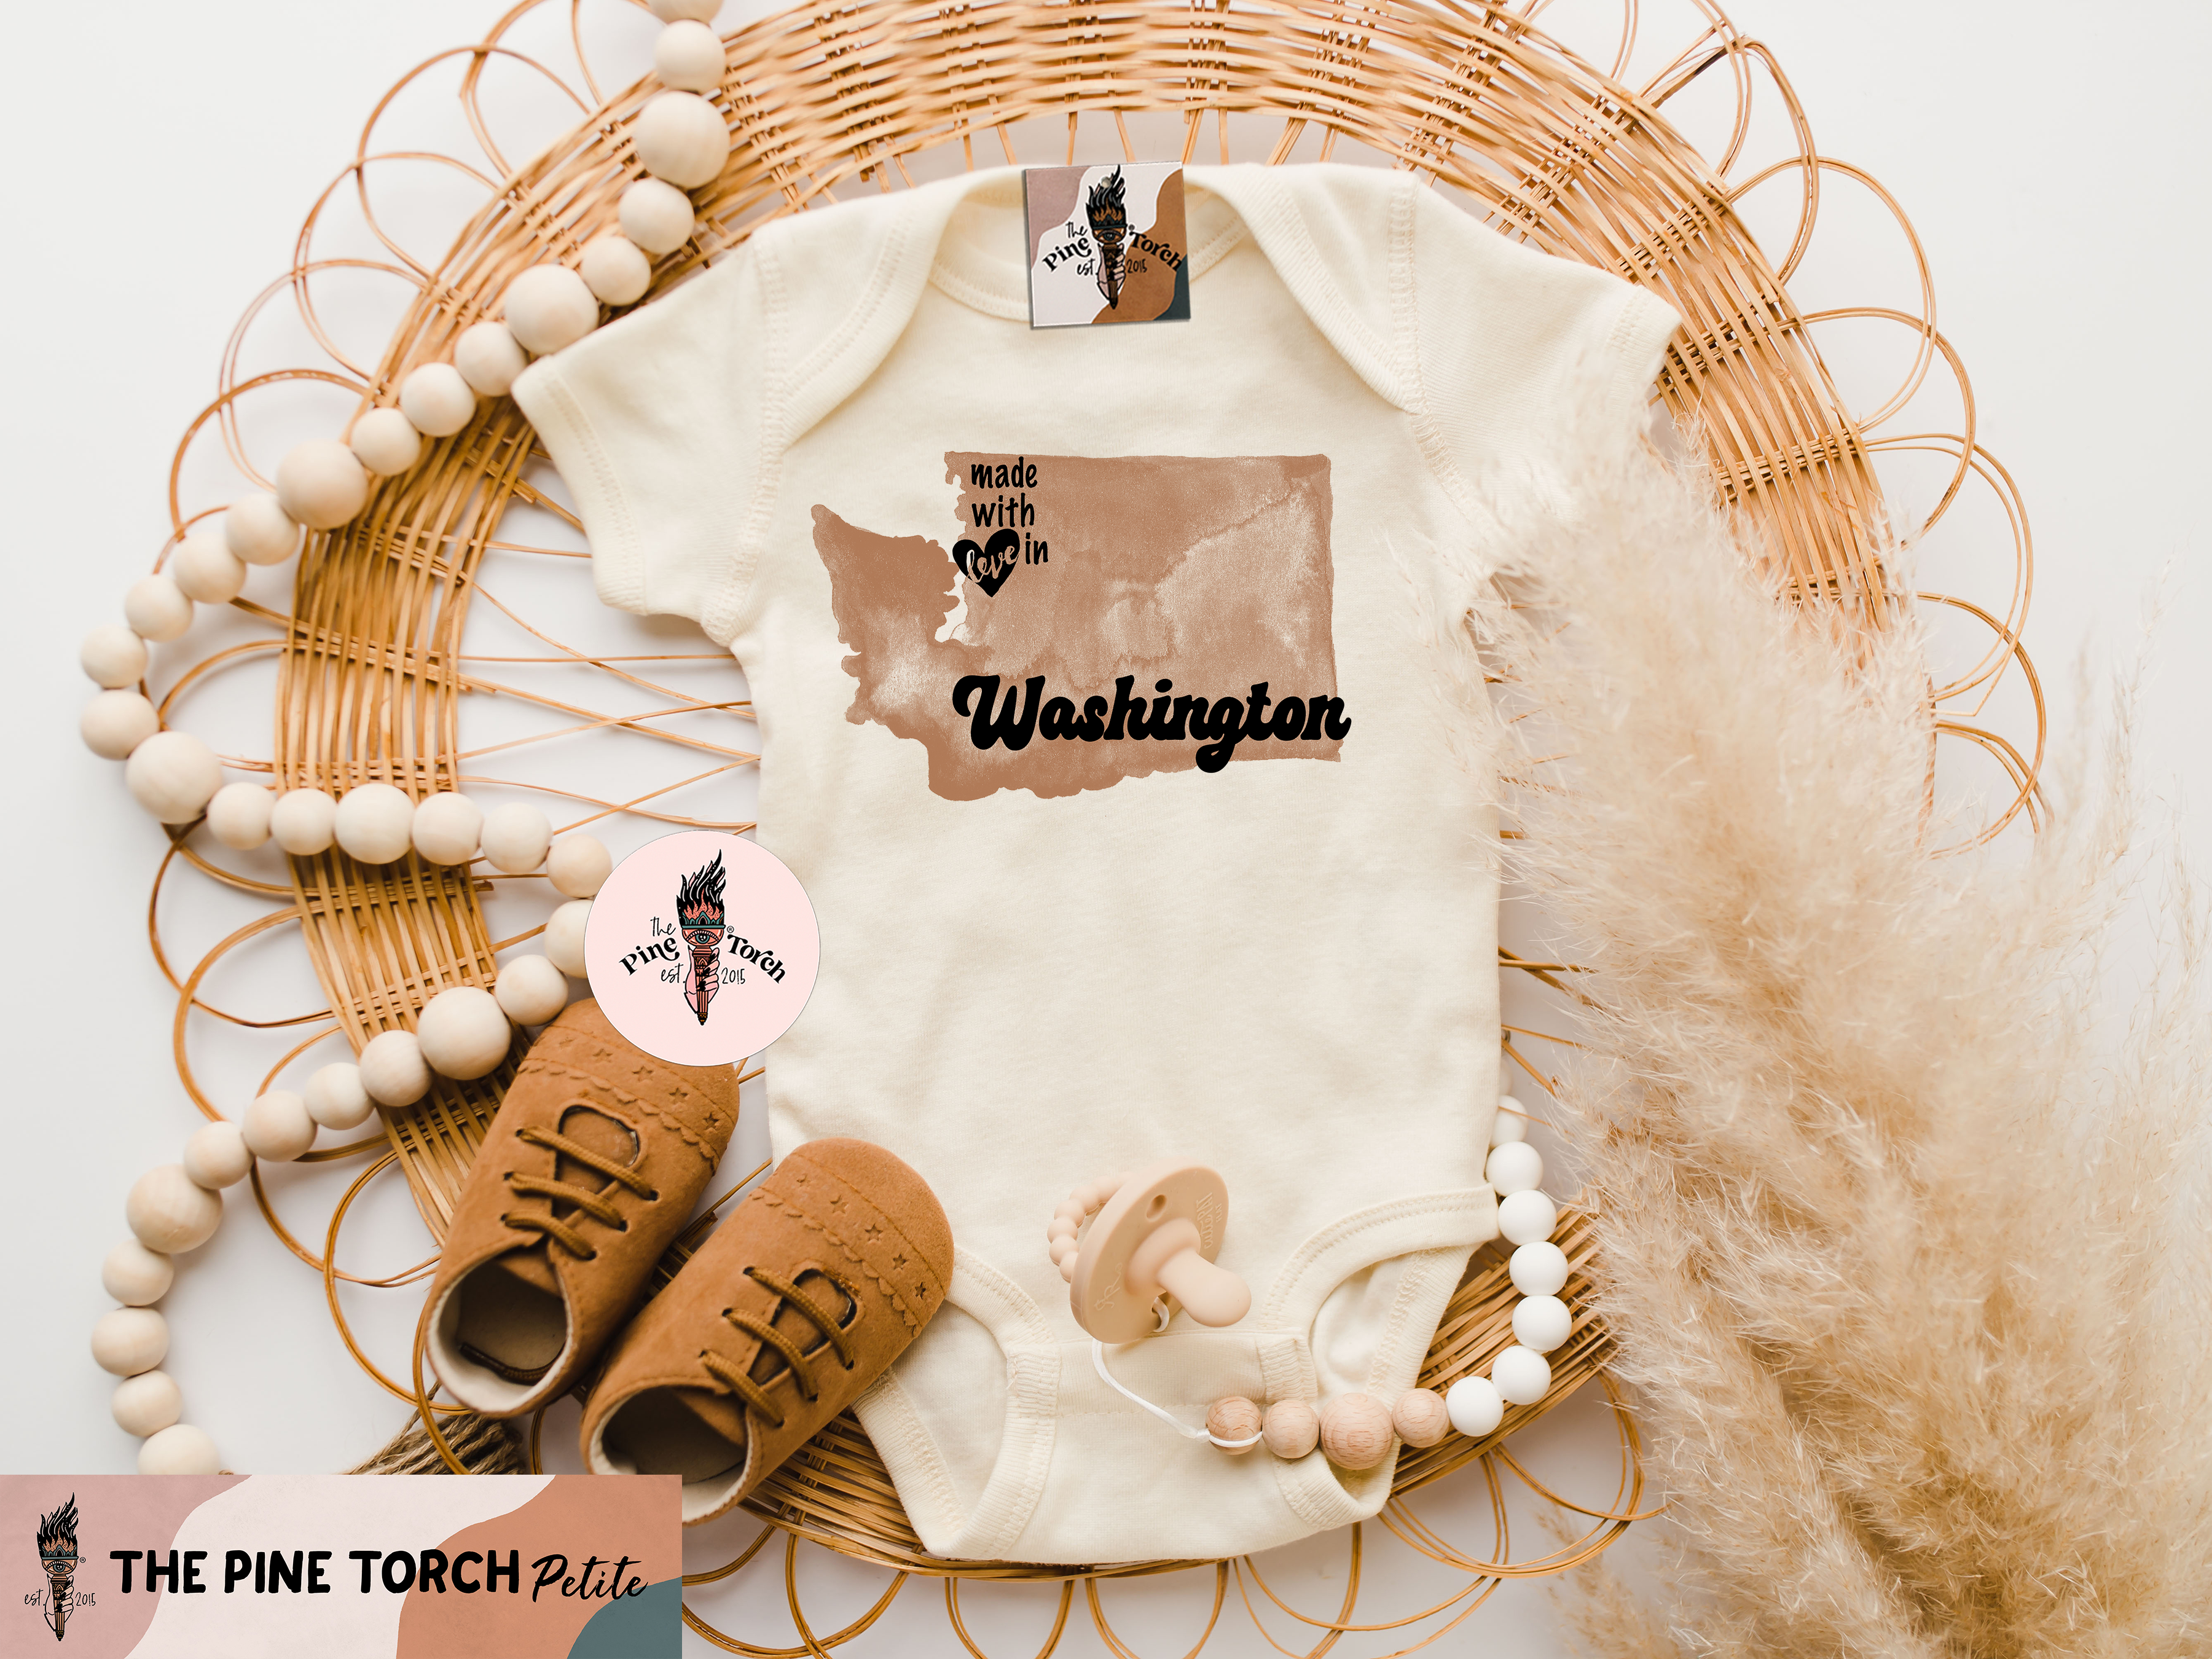 « MADE WITH LOVE IN WASHINGTON » BODYSUIT